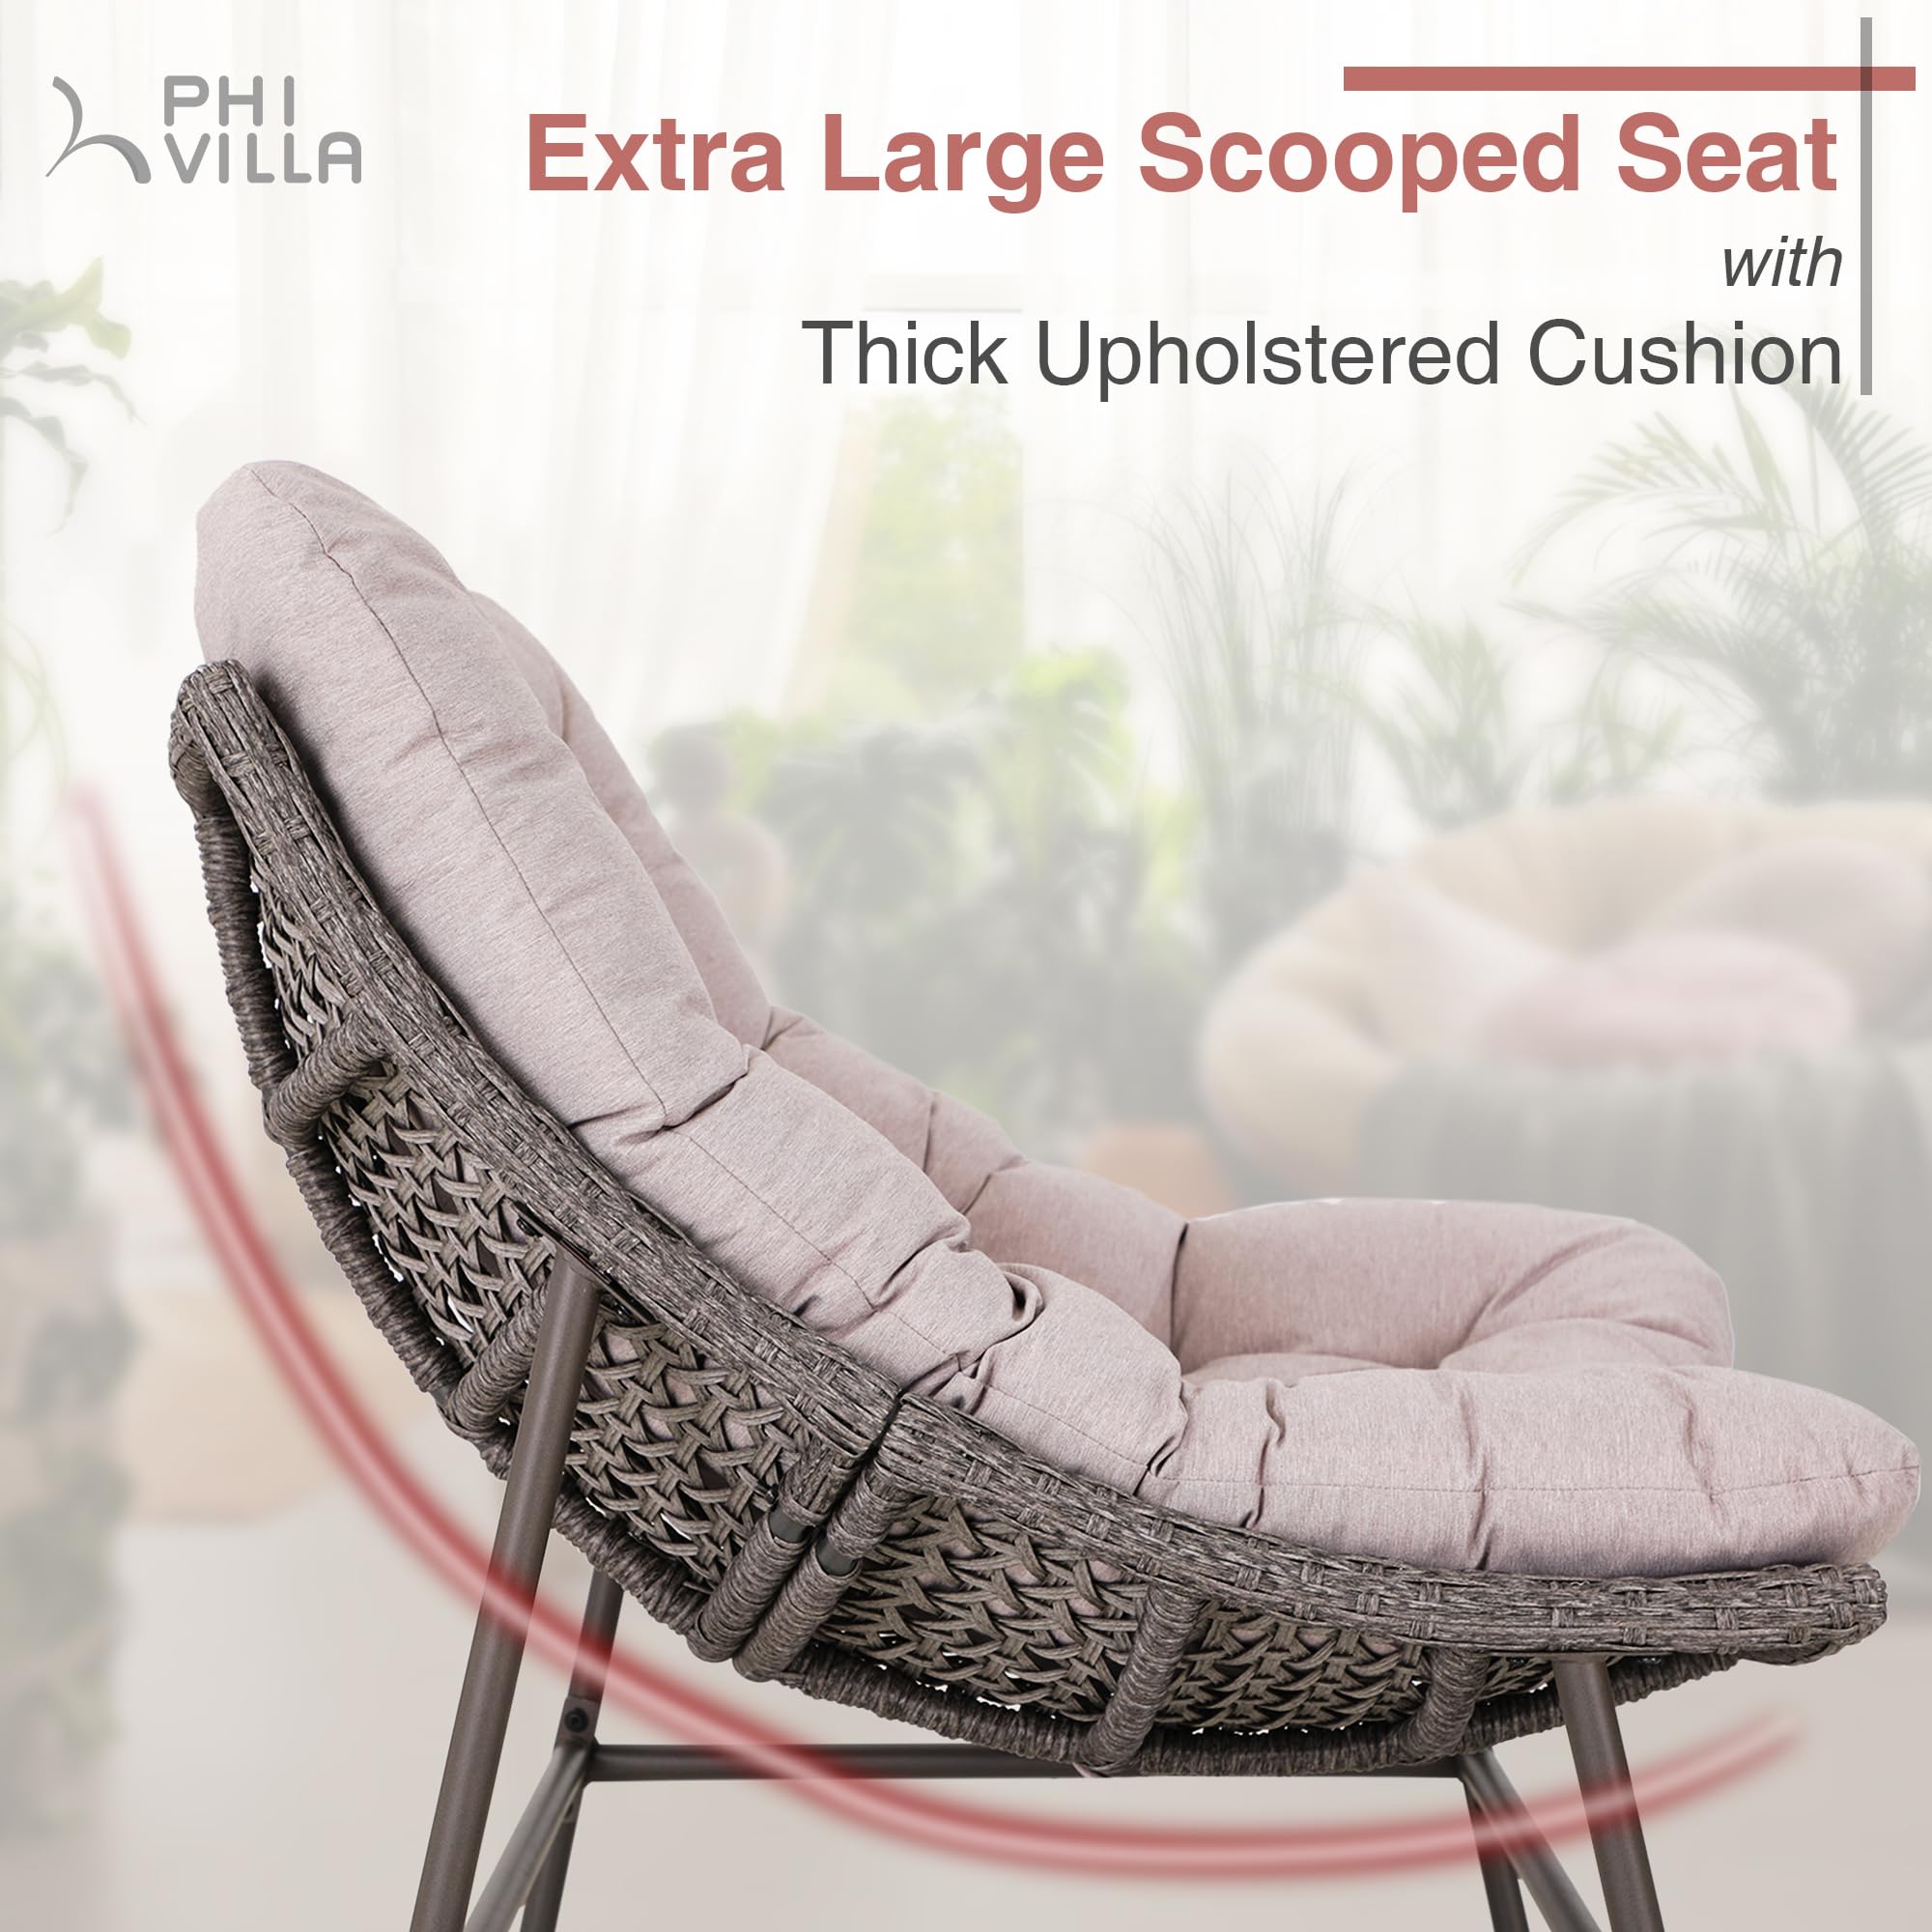 PHI VILLA Outdoor Papasan Chairs Set of 2, Oversized Scoop Wicker Chairs with Cushions & Steel Frame, Double Comfy Conversation Reading Chairs Furniture for Apartment Patio, Porch, Deck, Balcony